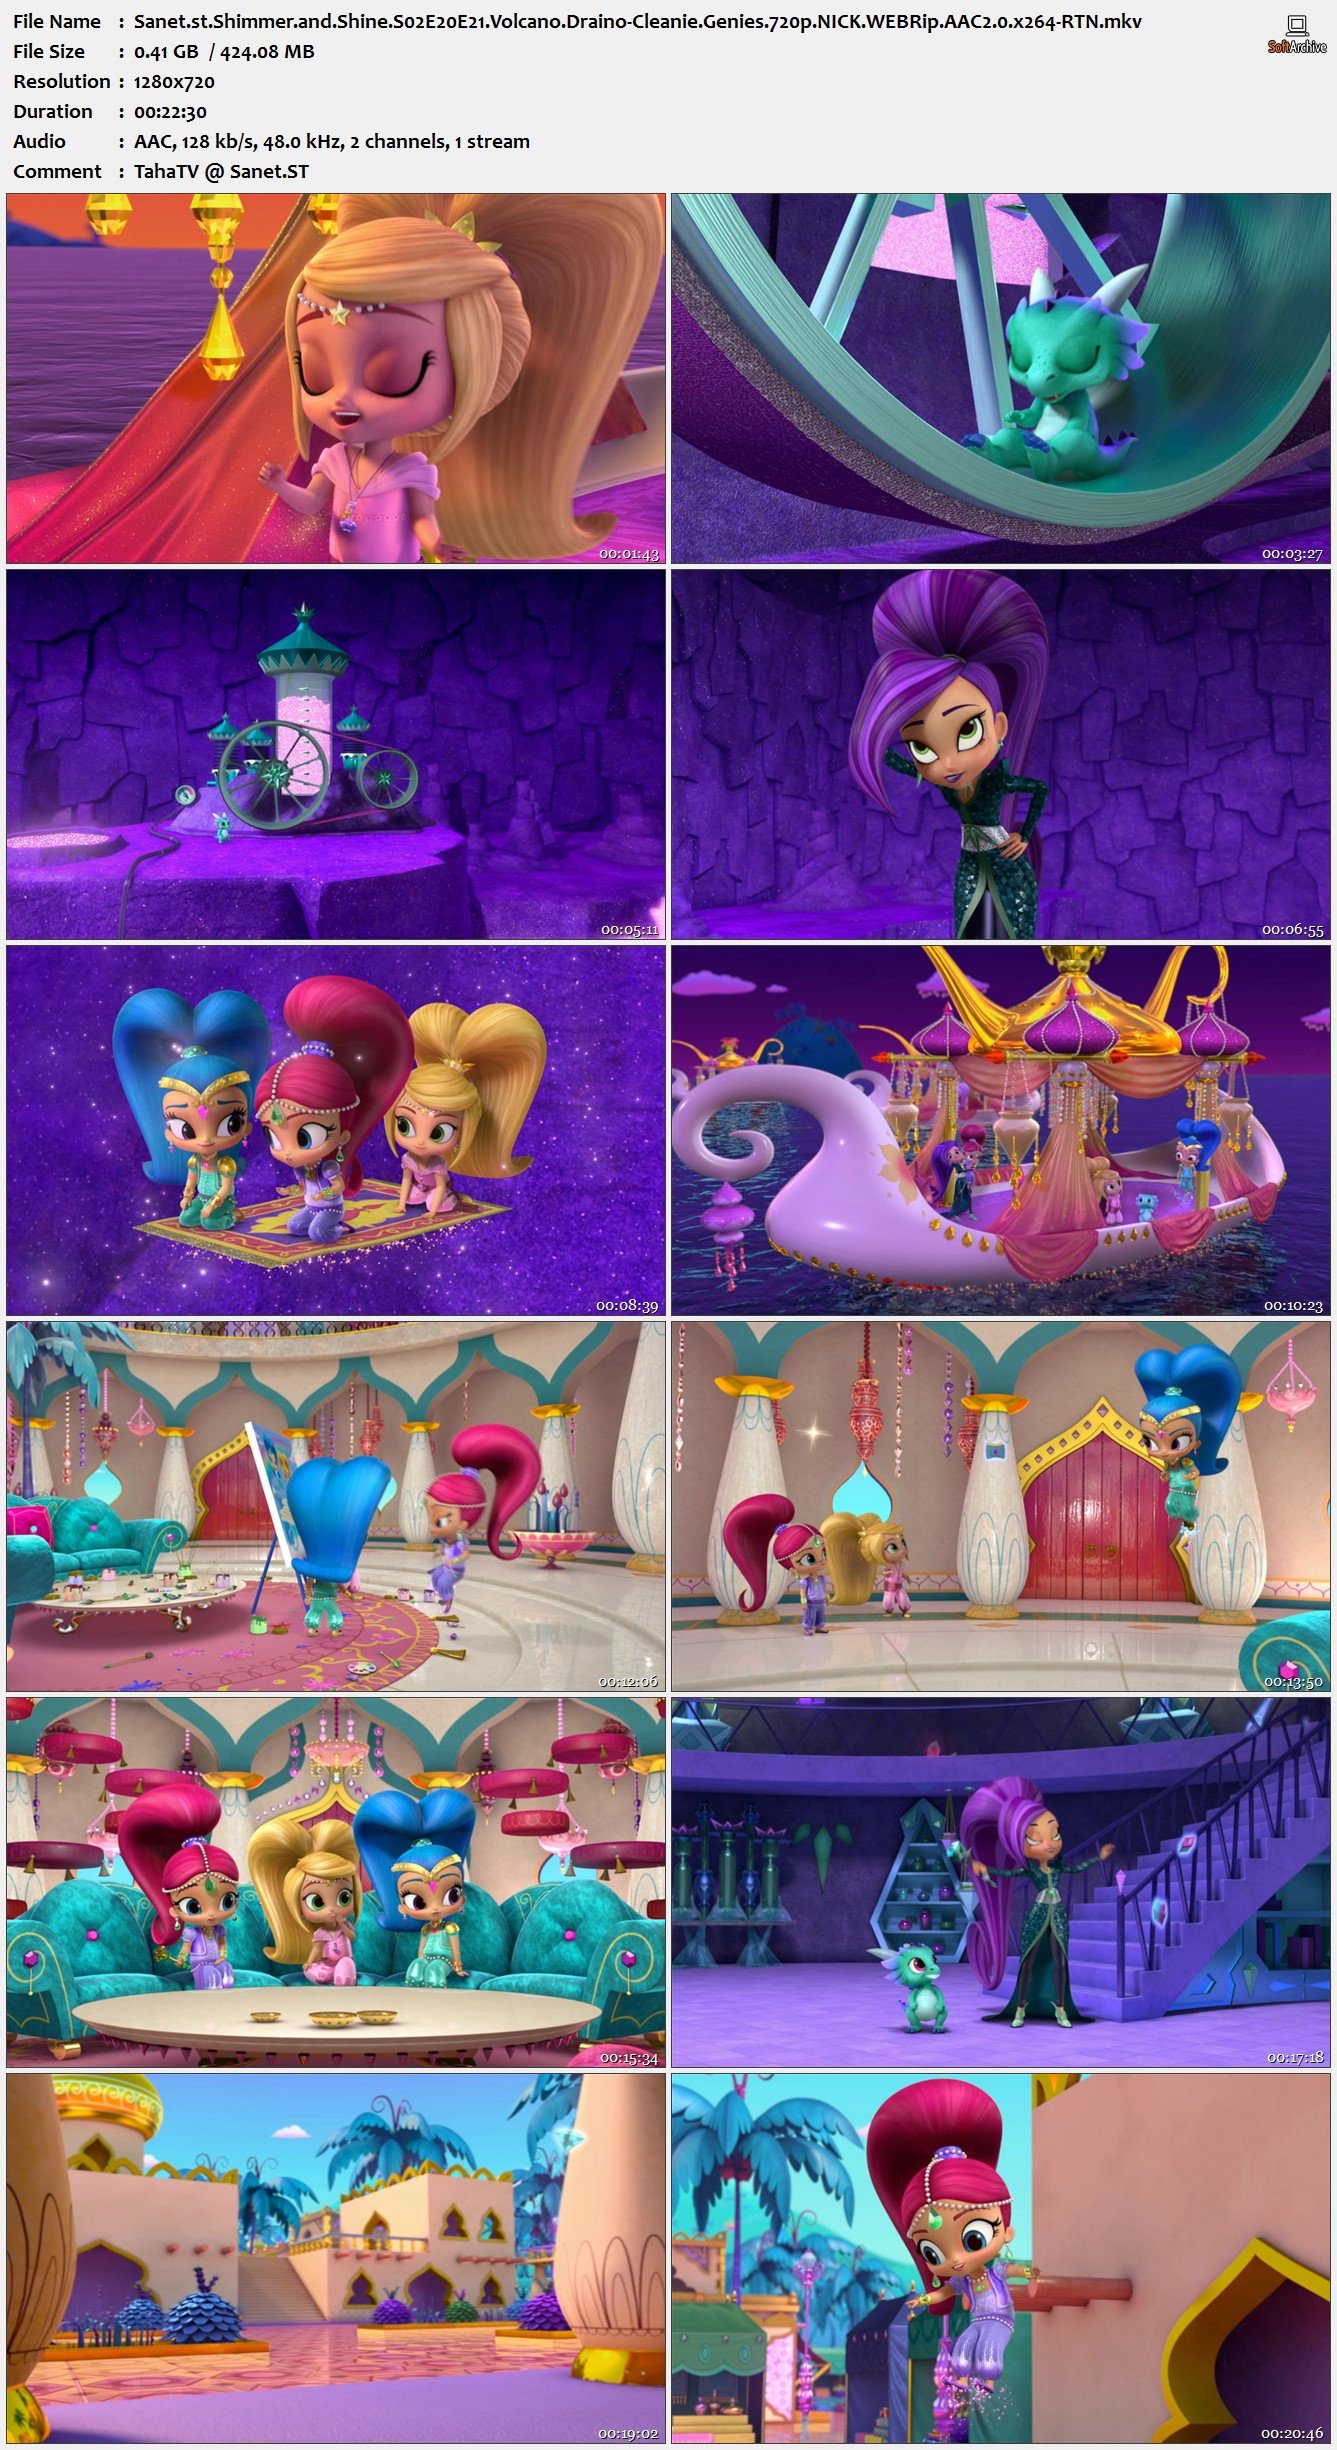 shimmer and shine episodes 720p aac